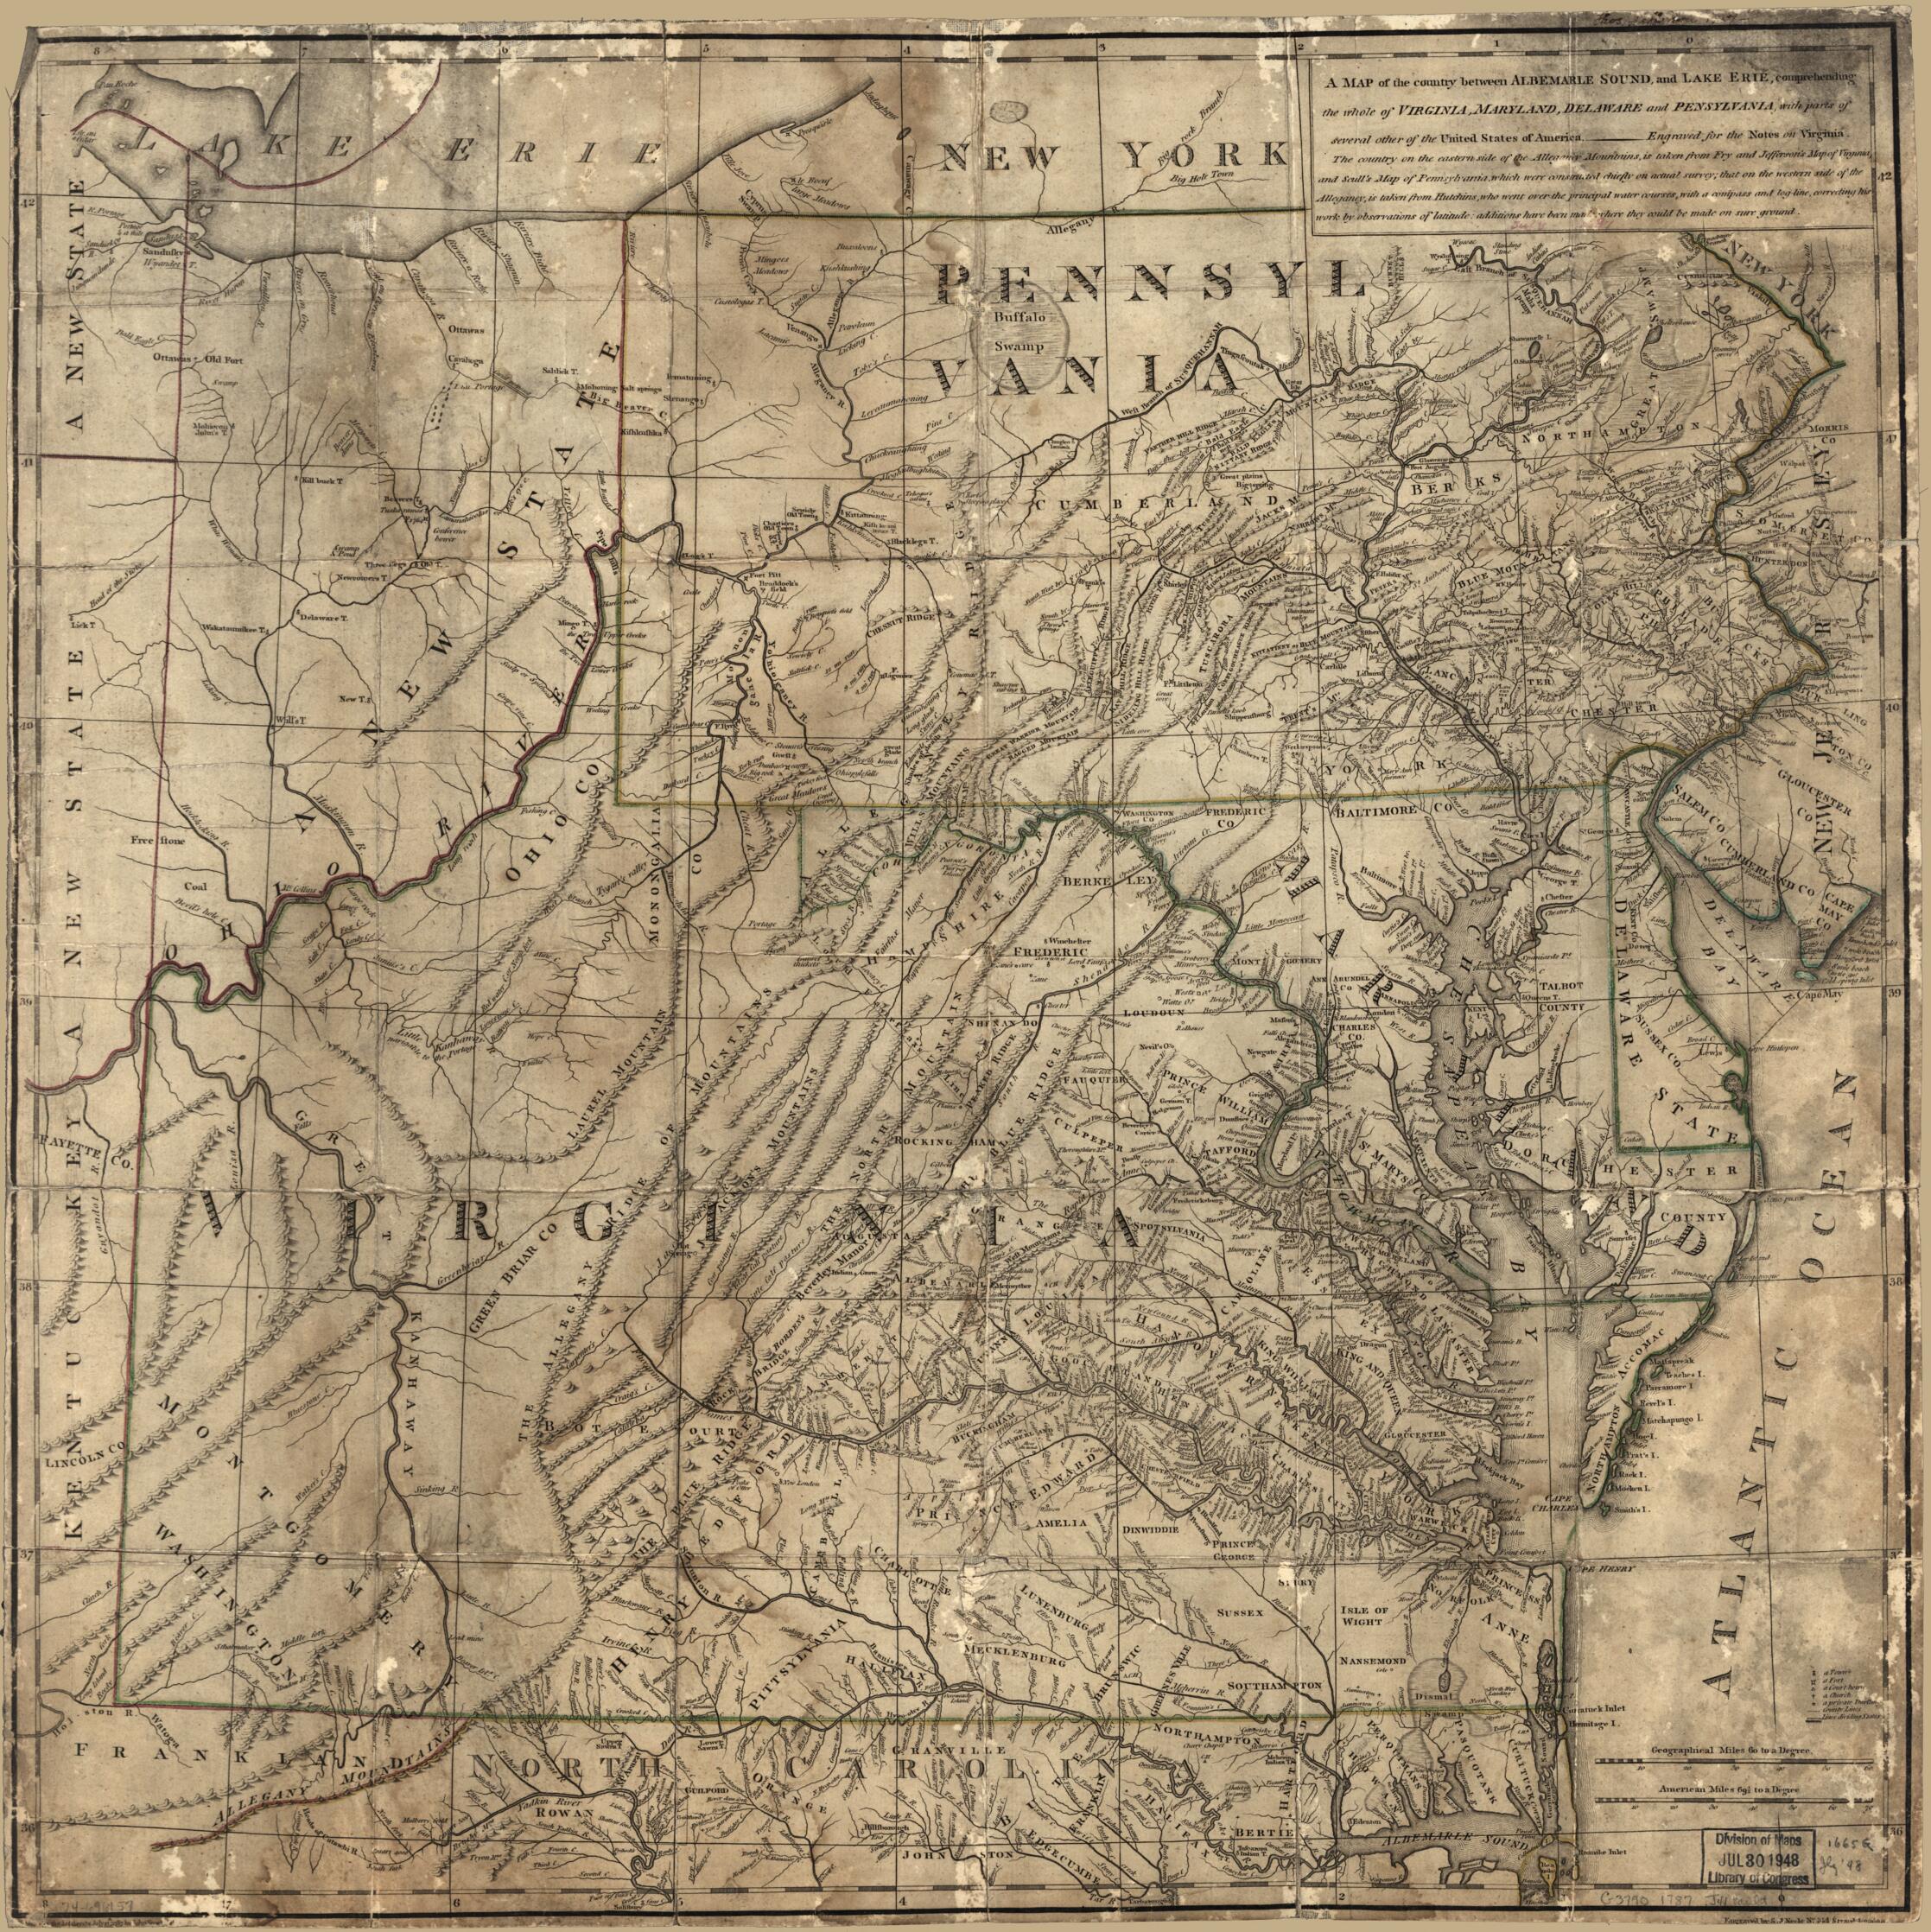 This old map of A Map of the Country Between Albemarle Sound, and Lake Erie, Comprehending the Whole of Virginia, Maryland, Delaware and Pensylvania, With Parts of Several Other of the United States of America from 1787 was created by Thomas Jefferson, S